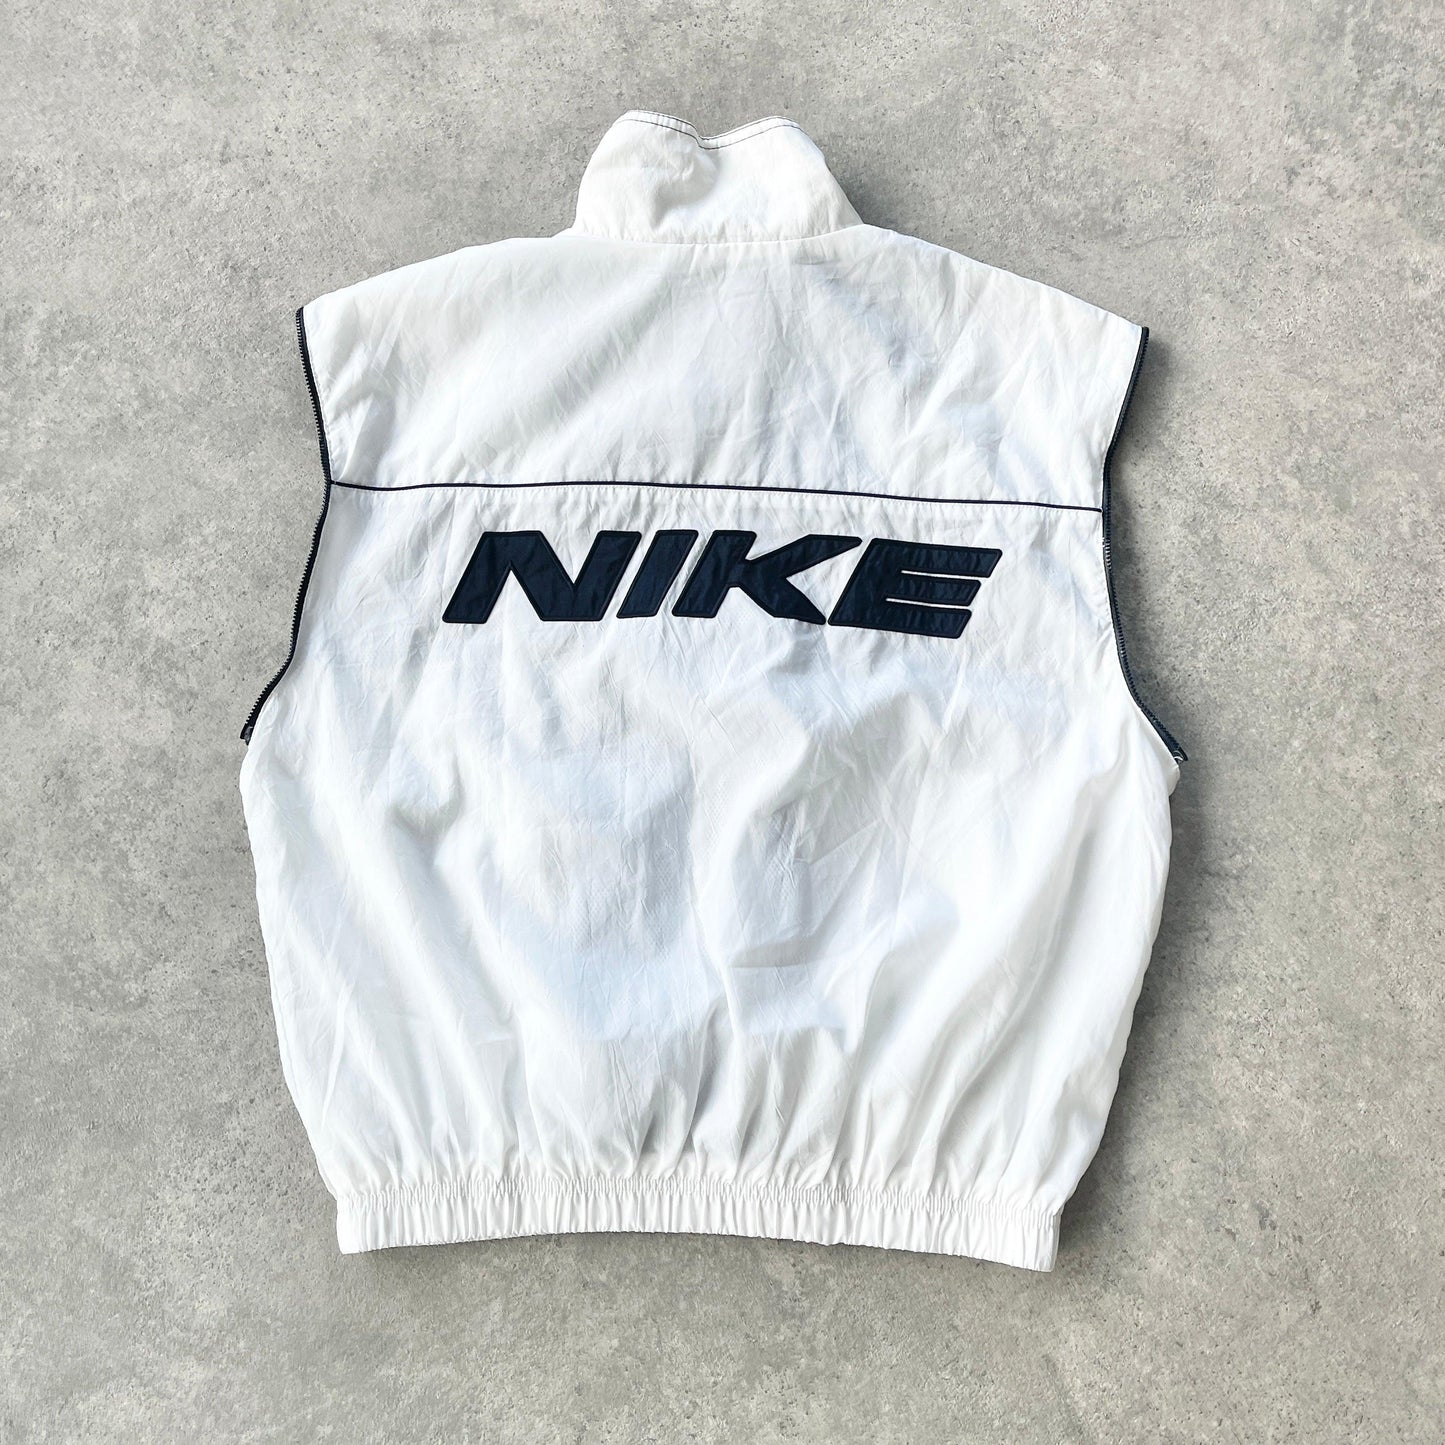 Nike 1990s lightweight convertible spellout shell jacket (S) - Known Source